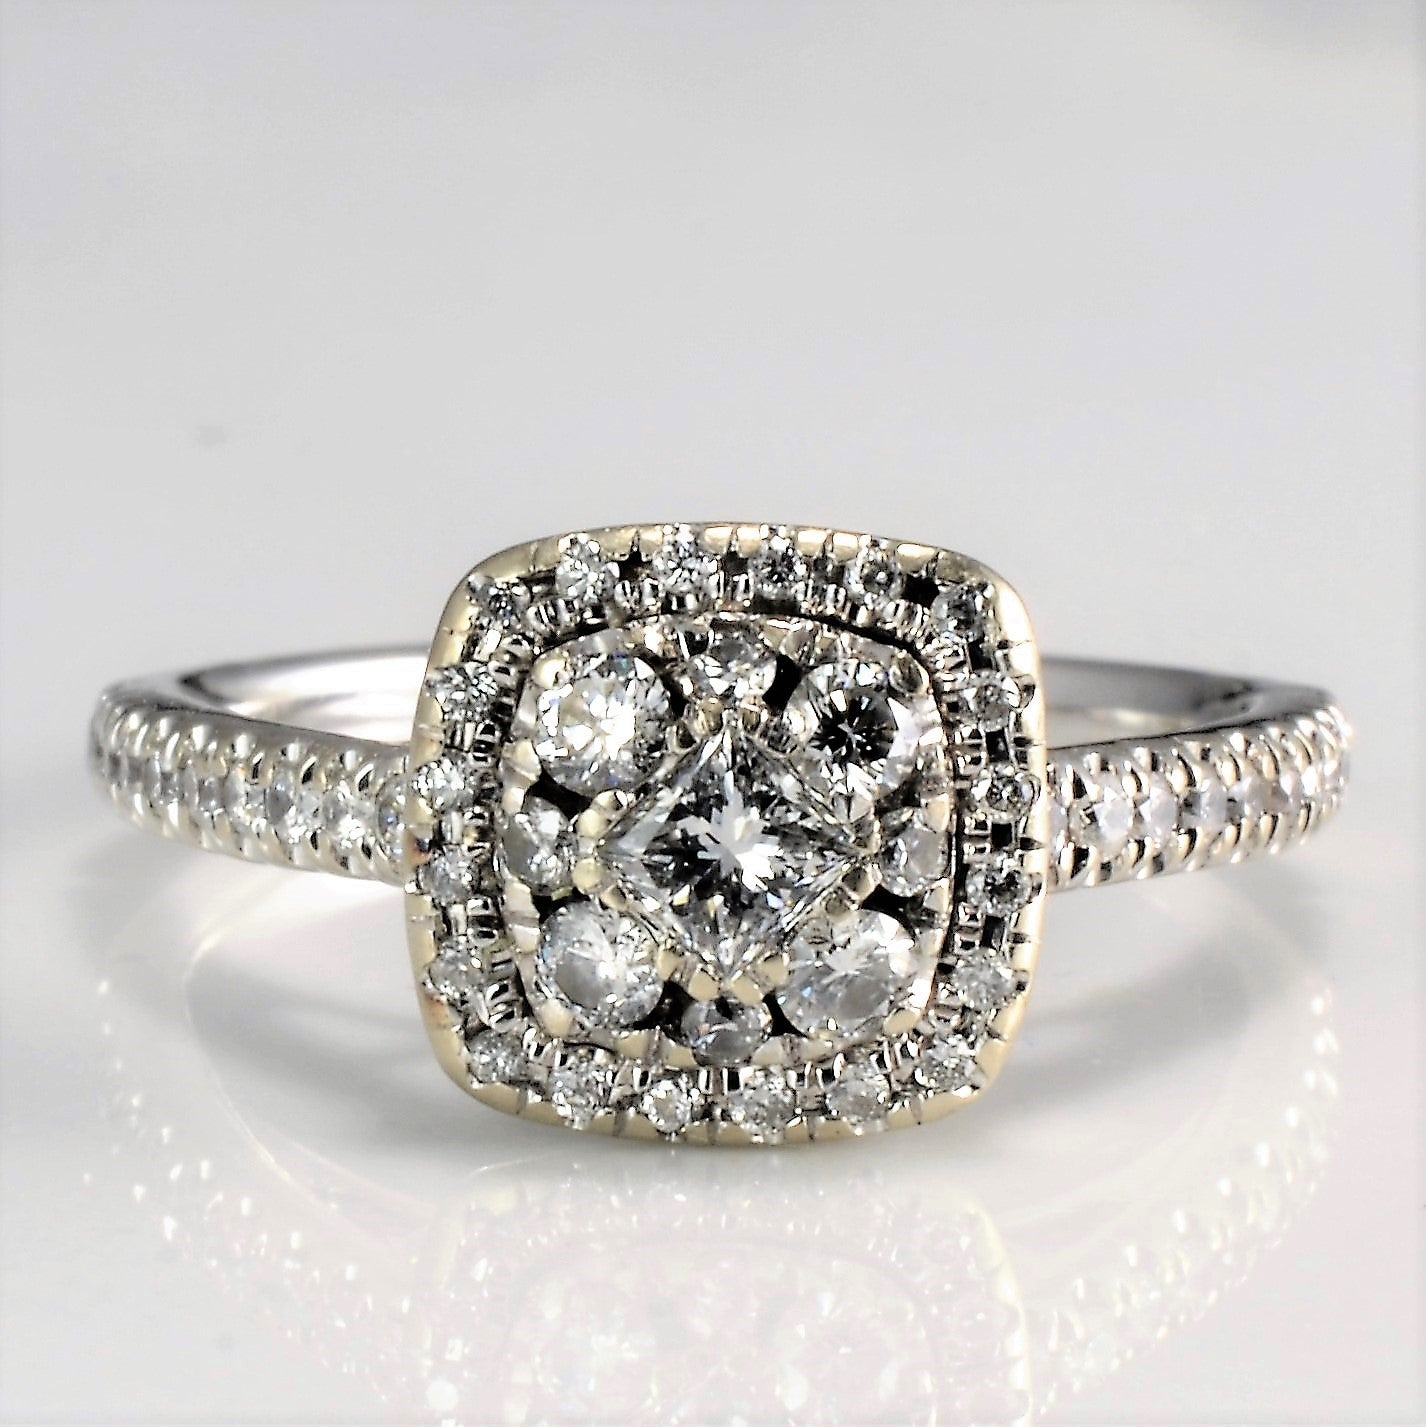 Cathedral Set Cluster Diamond Engagement Ring | 0.48 ctw, SZ 6.5 |